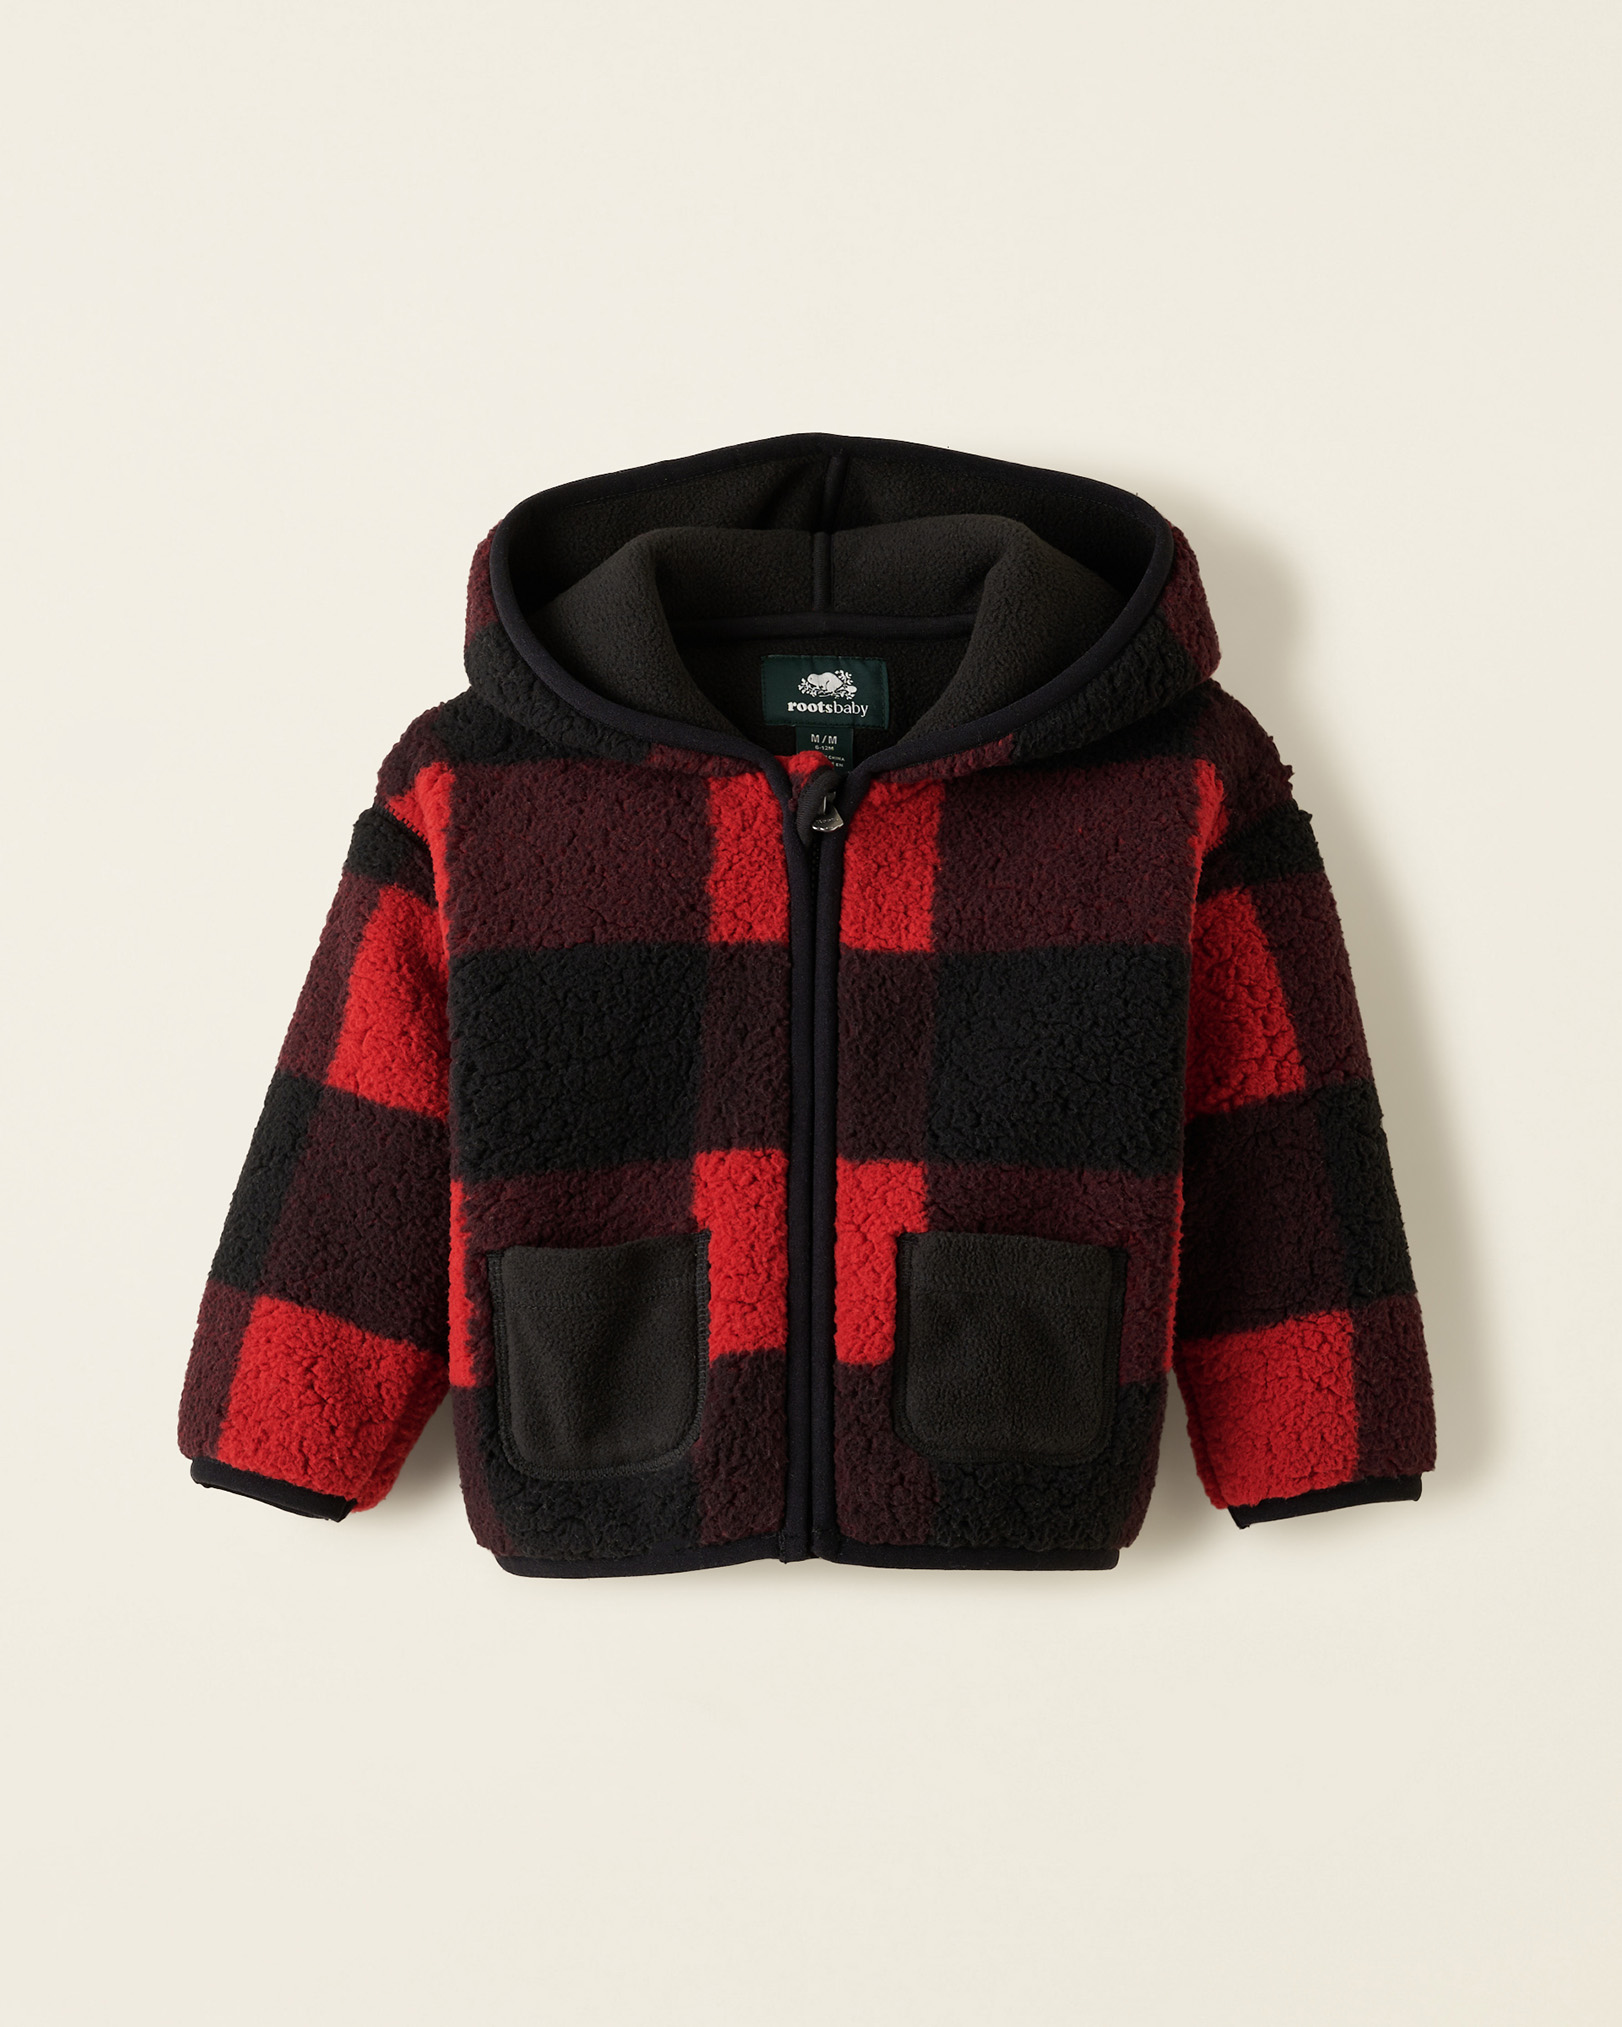 Roots Baby Shearling Fleece Jacket in Cabin Red